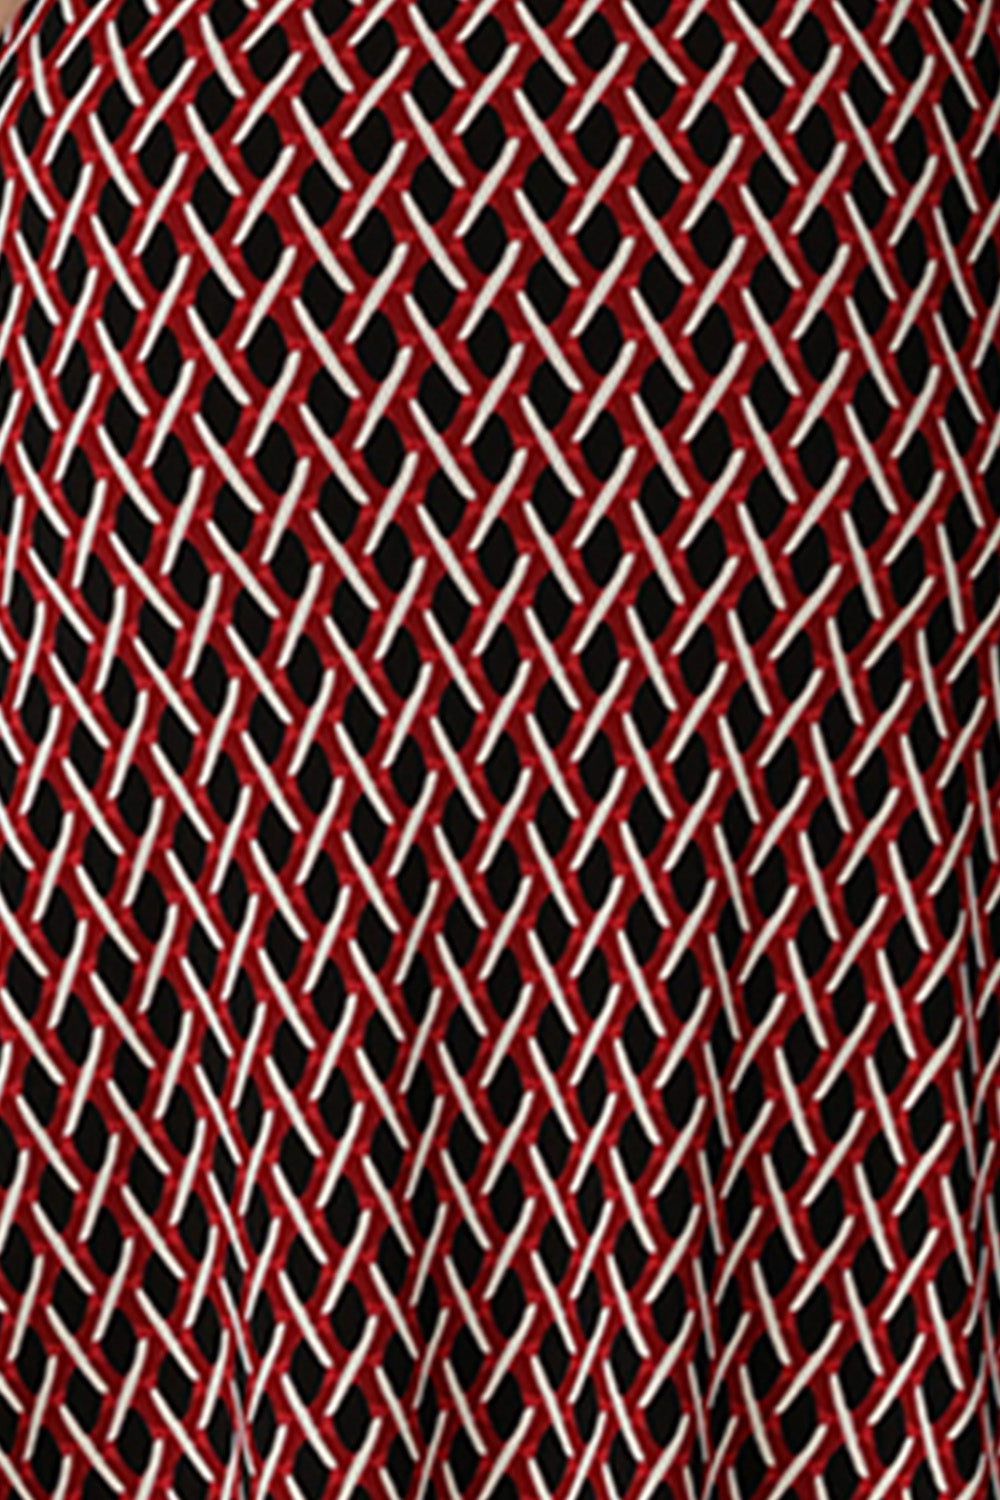 A swatch of red, vanilla and black 'Chevron' print fabric used by Australian fashion brand, Leina & Fleur to make a range of women's workwear printed wide leg pants.